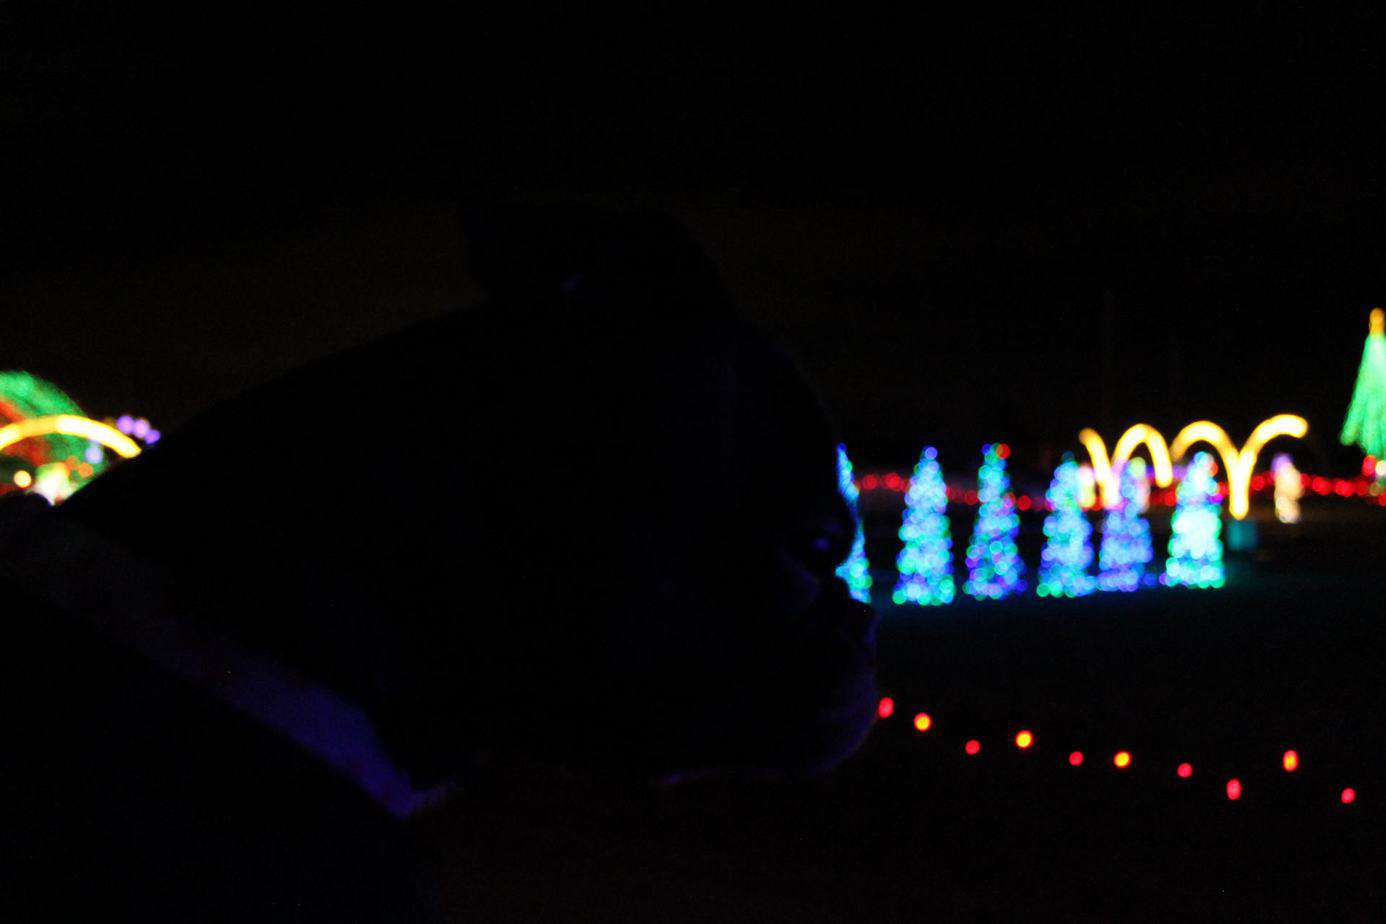 Silhouette of dog looking out window at Christmas tree colored lights